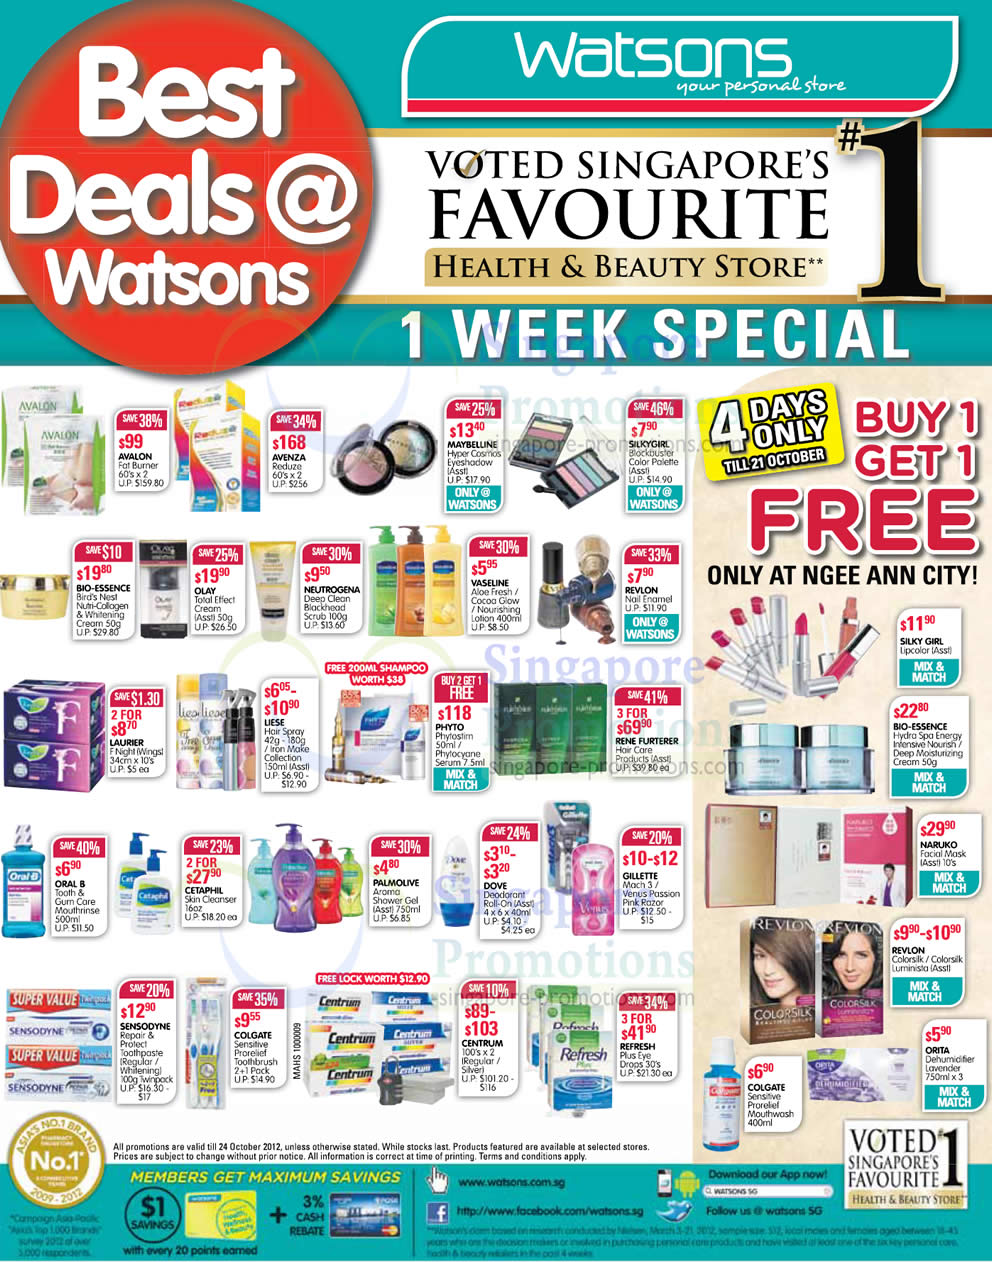 Featured image for Watsons Personal Care, Health, Cosmetics & Beauty Offers 18 - 24 Oct 2012